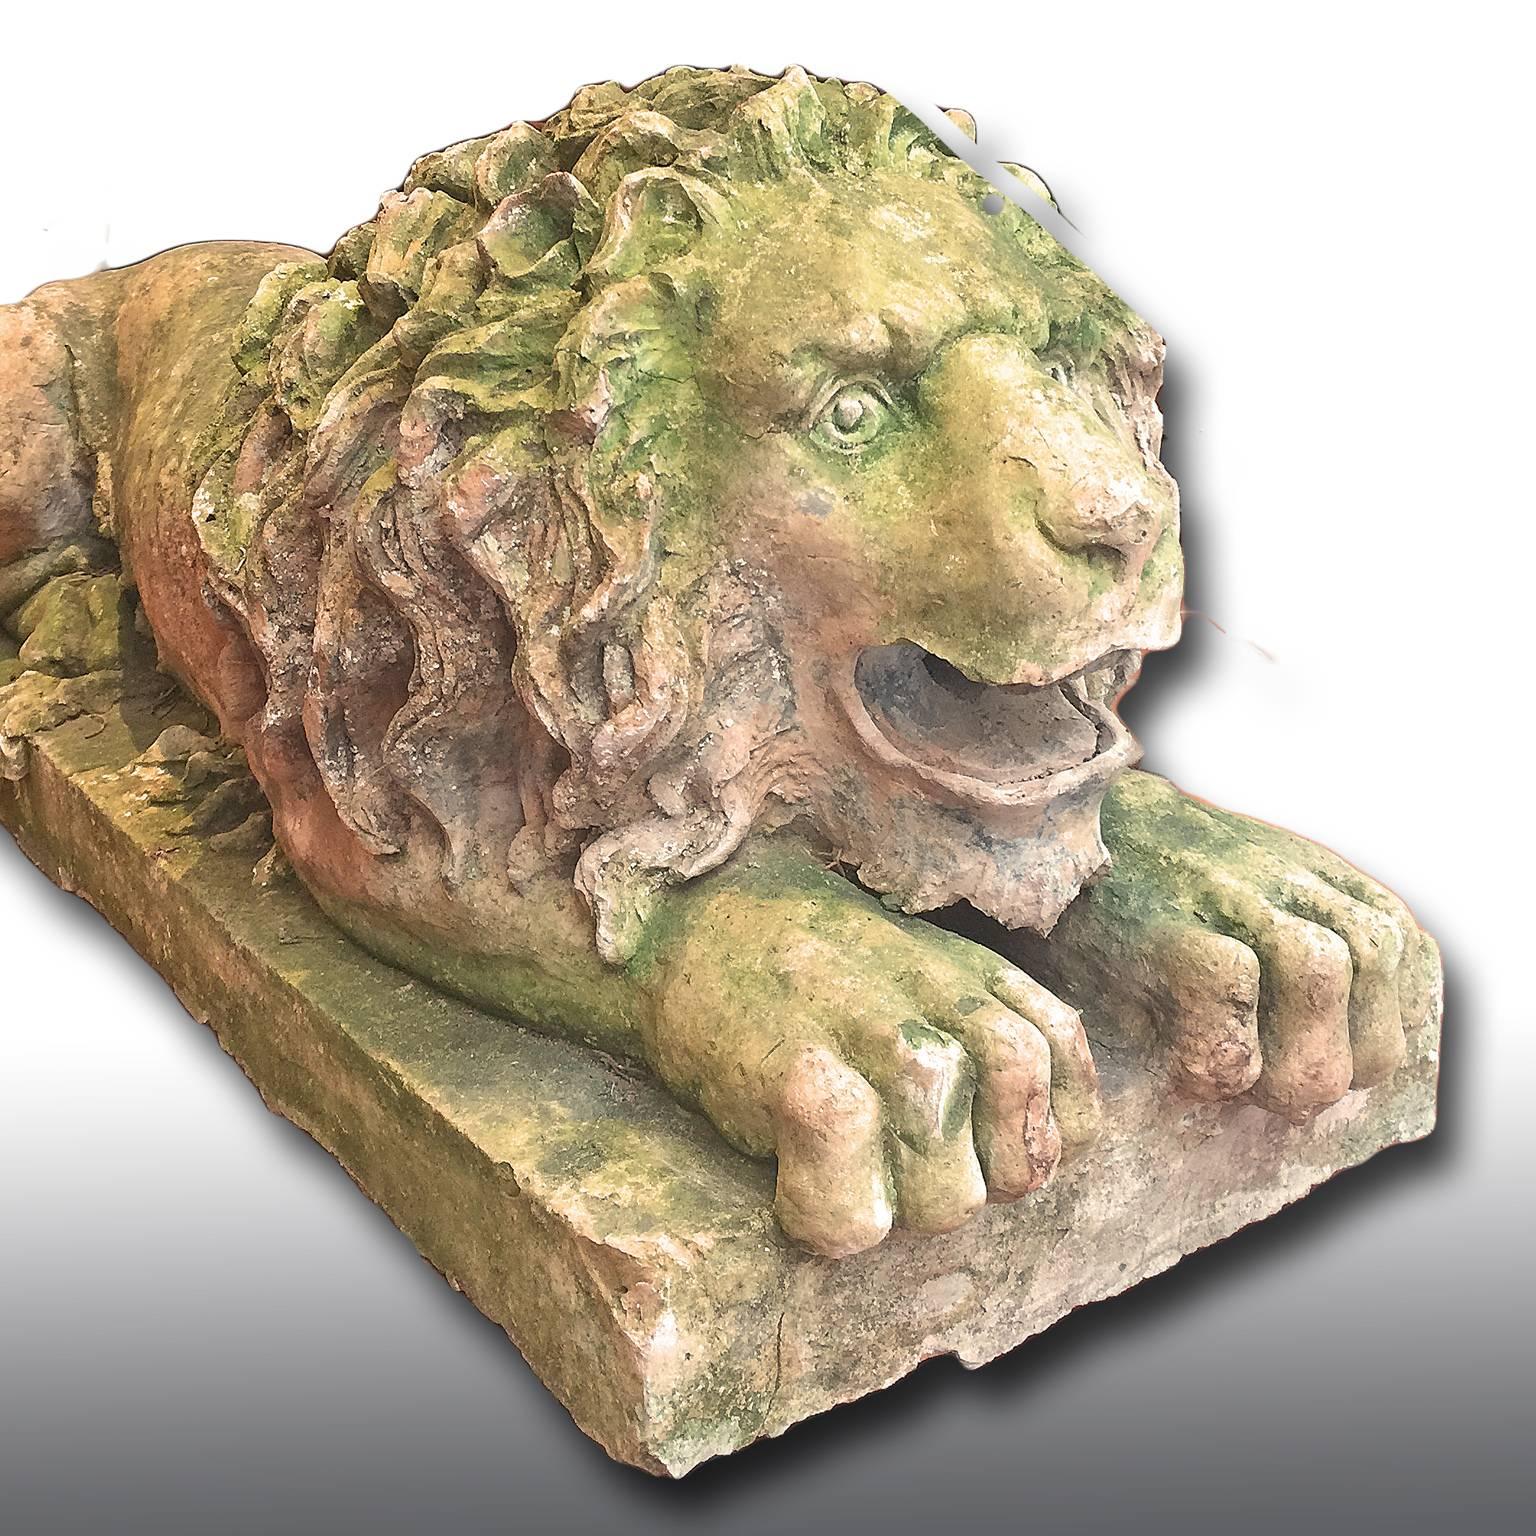 Carved Pair of 18th Century Italian Terracotta Lion Sculptures available separately